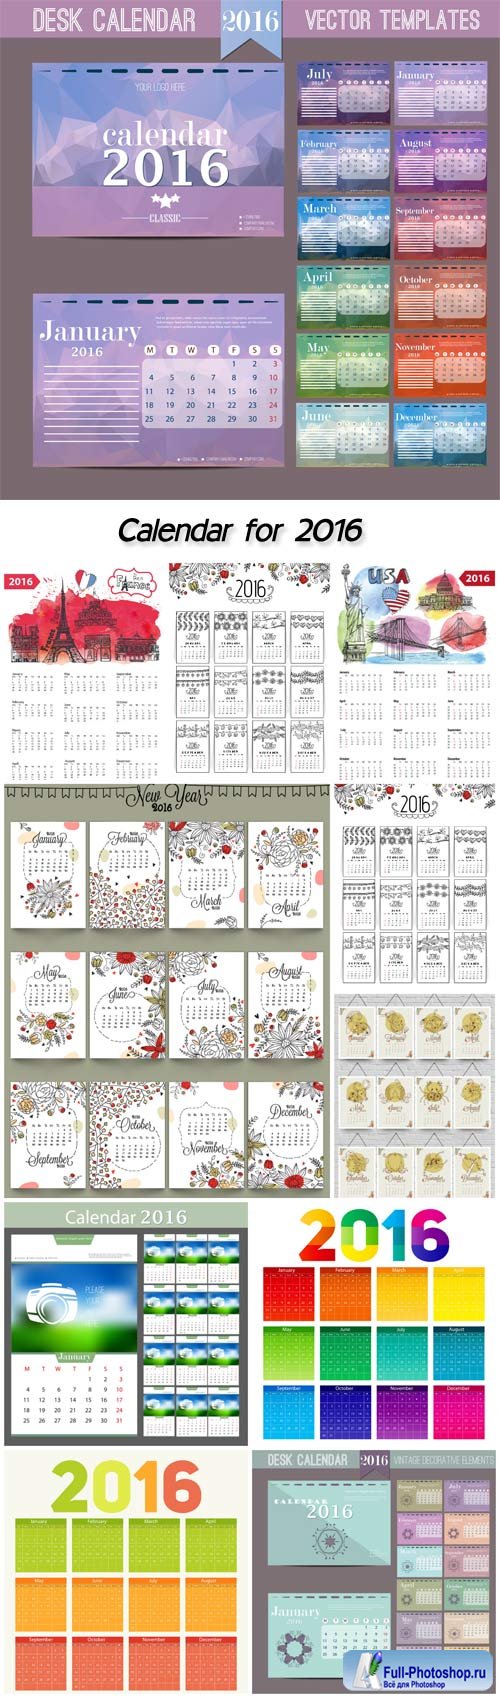 Calendar for 2016 with a beautiful ornament